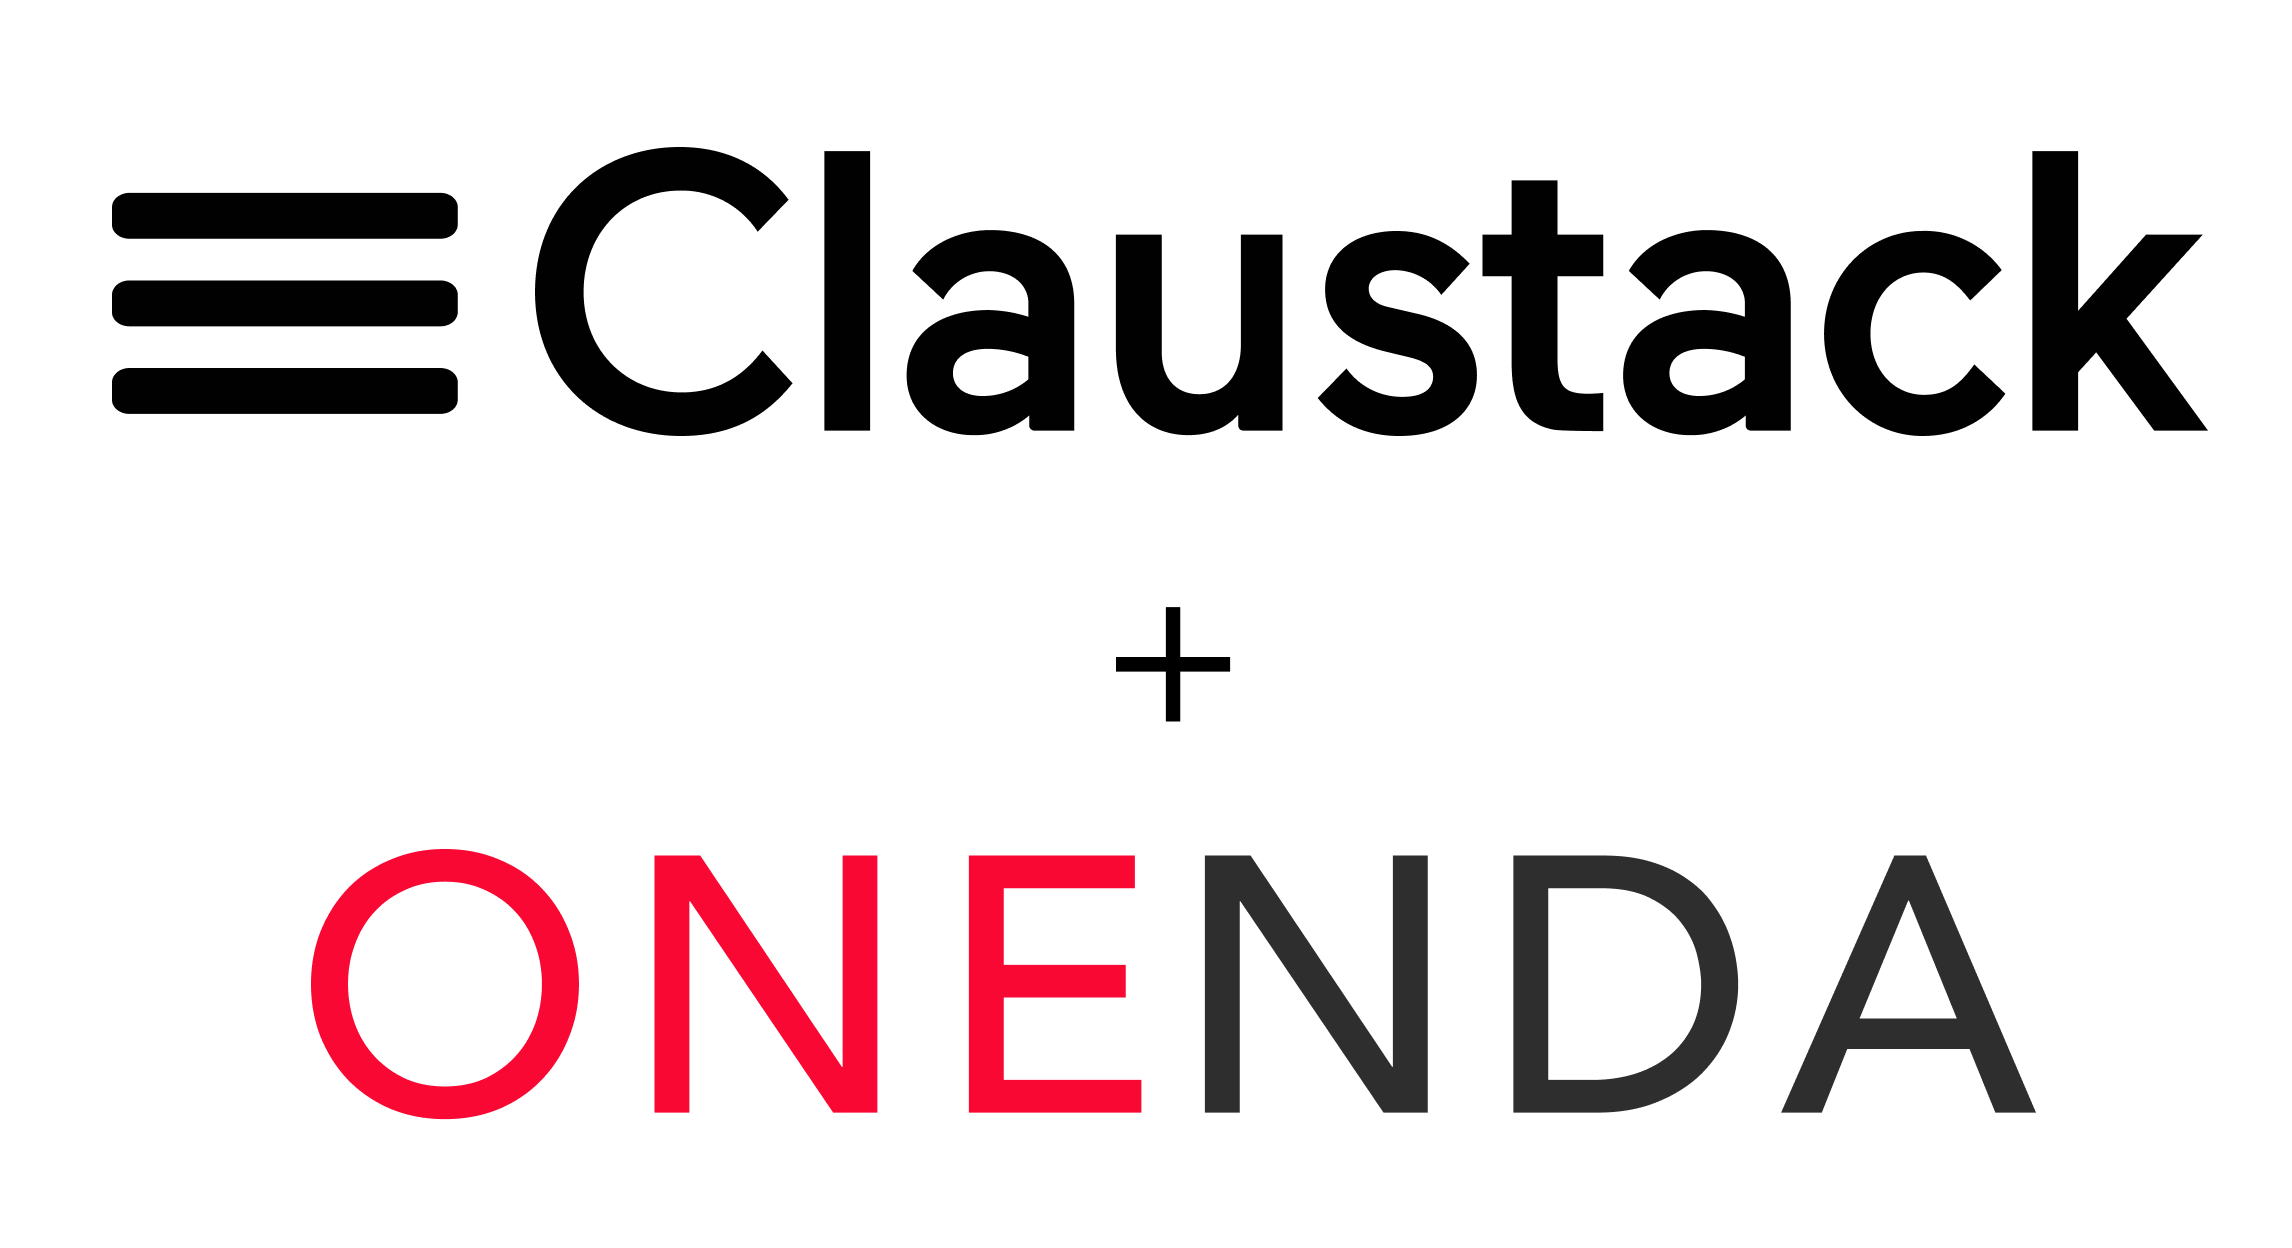 oneNDA to introduce three new initiatives following successful launch